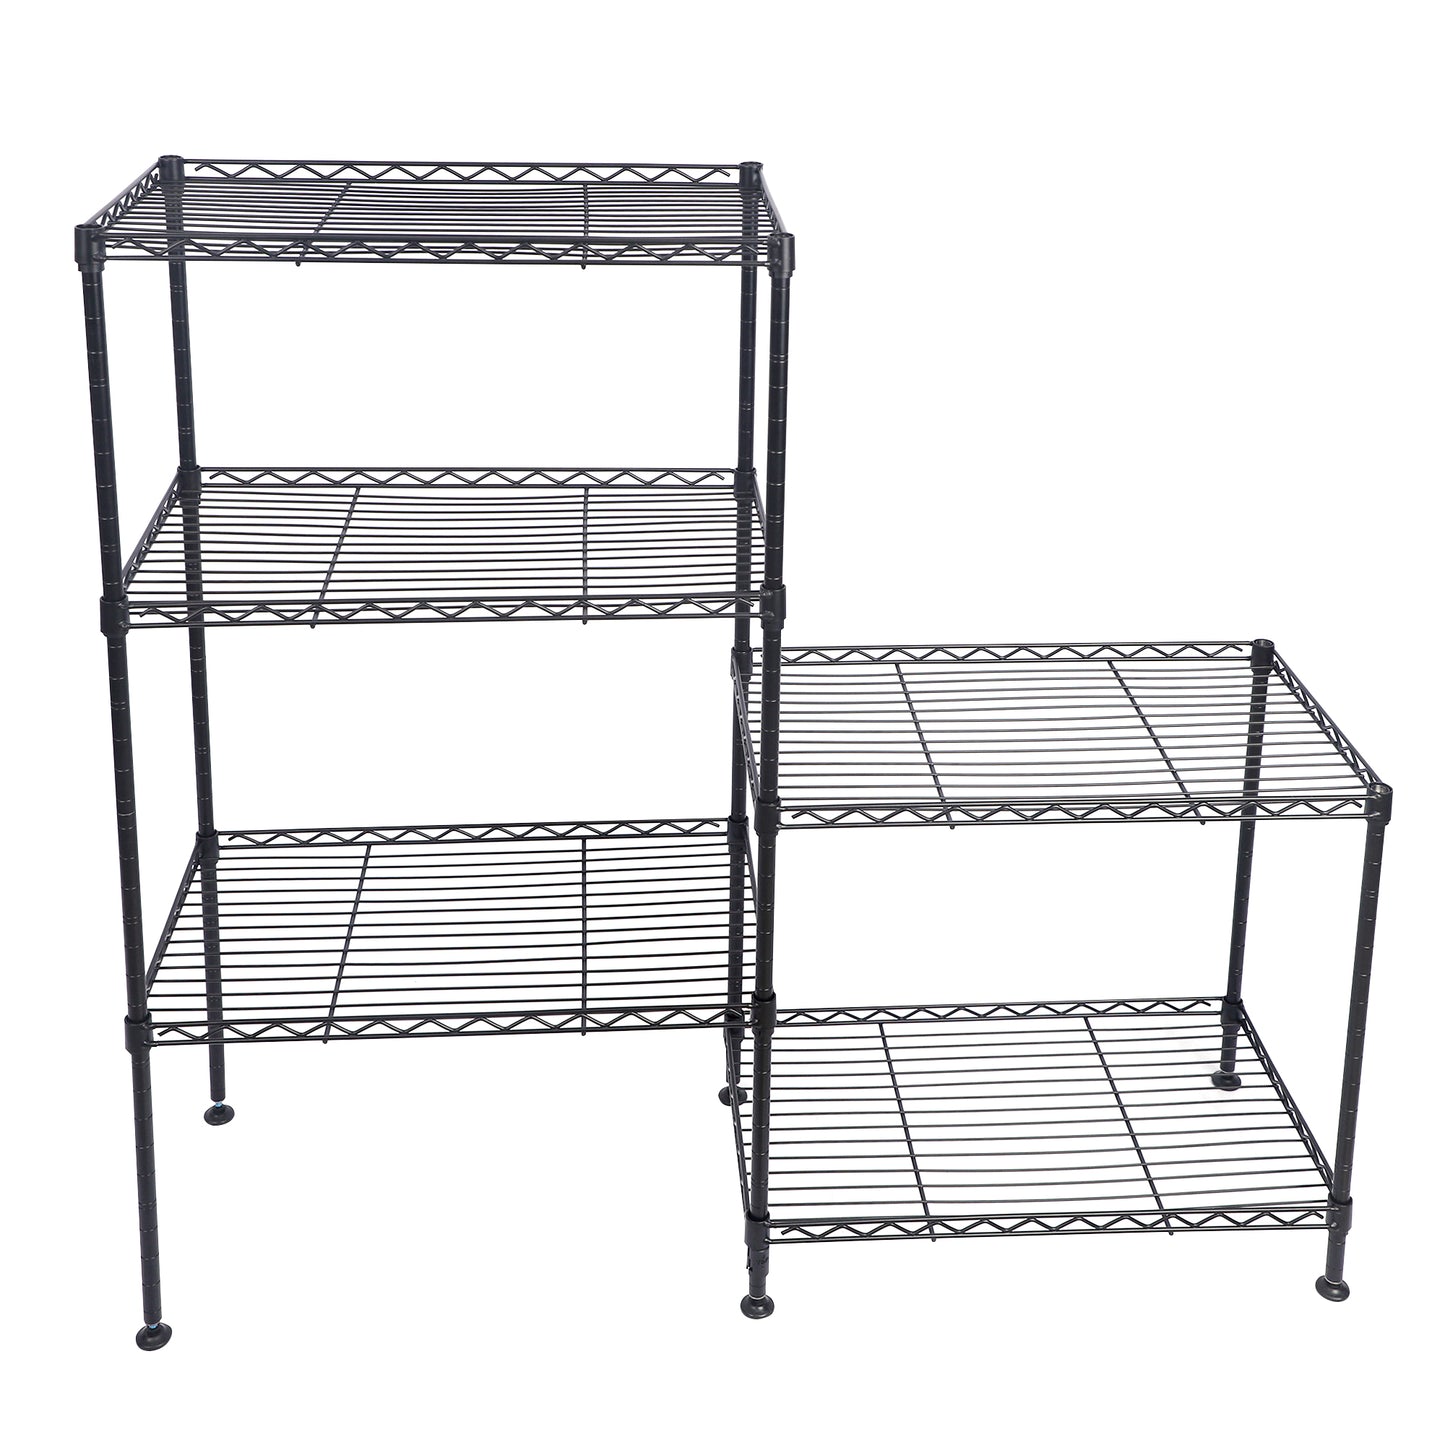 5 Tier Adjustable Storage Shelves Metal Storage Rack Wire Shelving Unit Storage Shelves Metal 19.68"Lx11.81"Wx53.54"H Changeable Assembly Floor Standing Rack for Pantry Closet Kitchen Laundry, Black